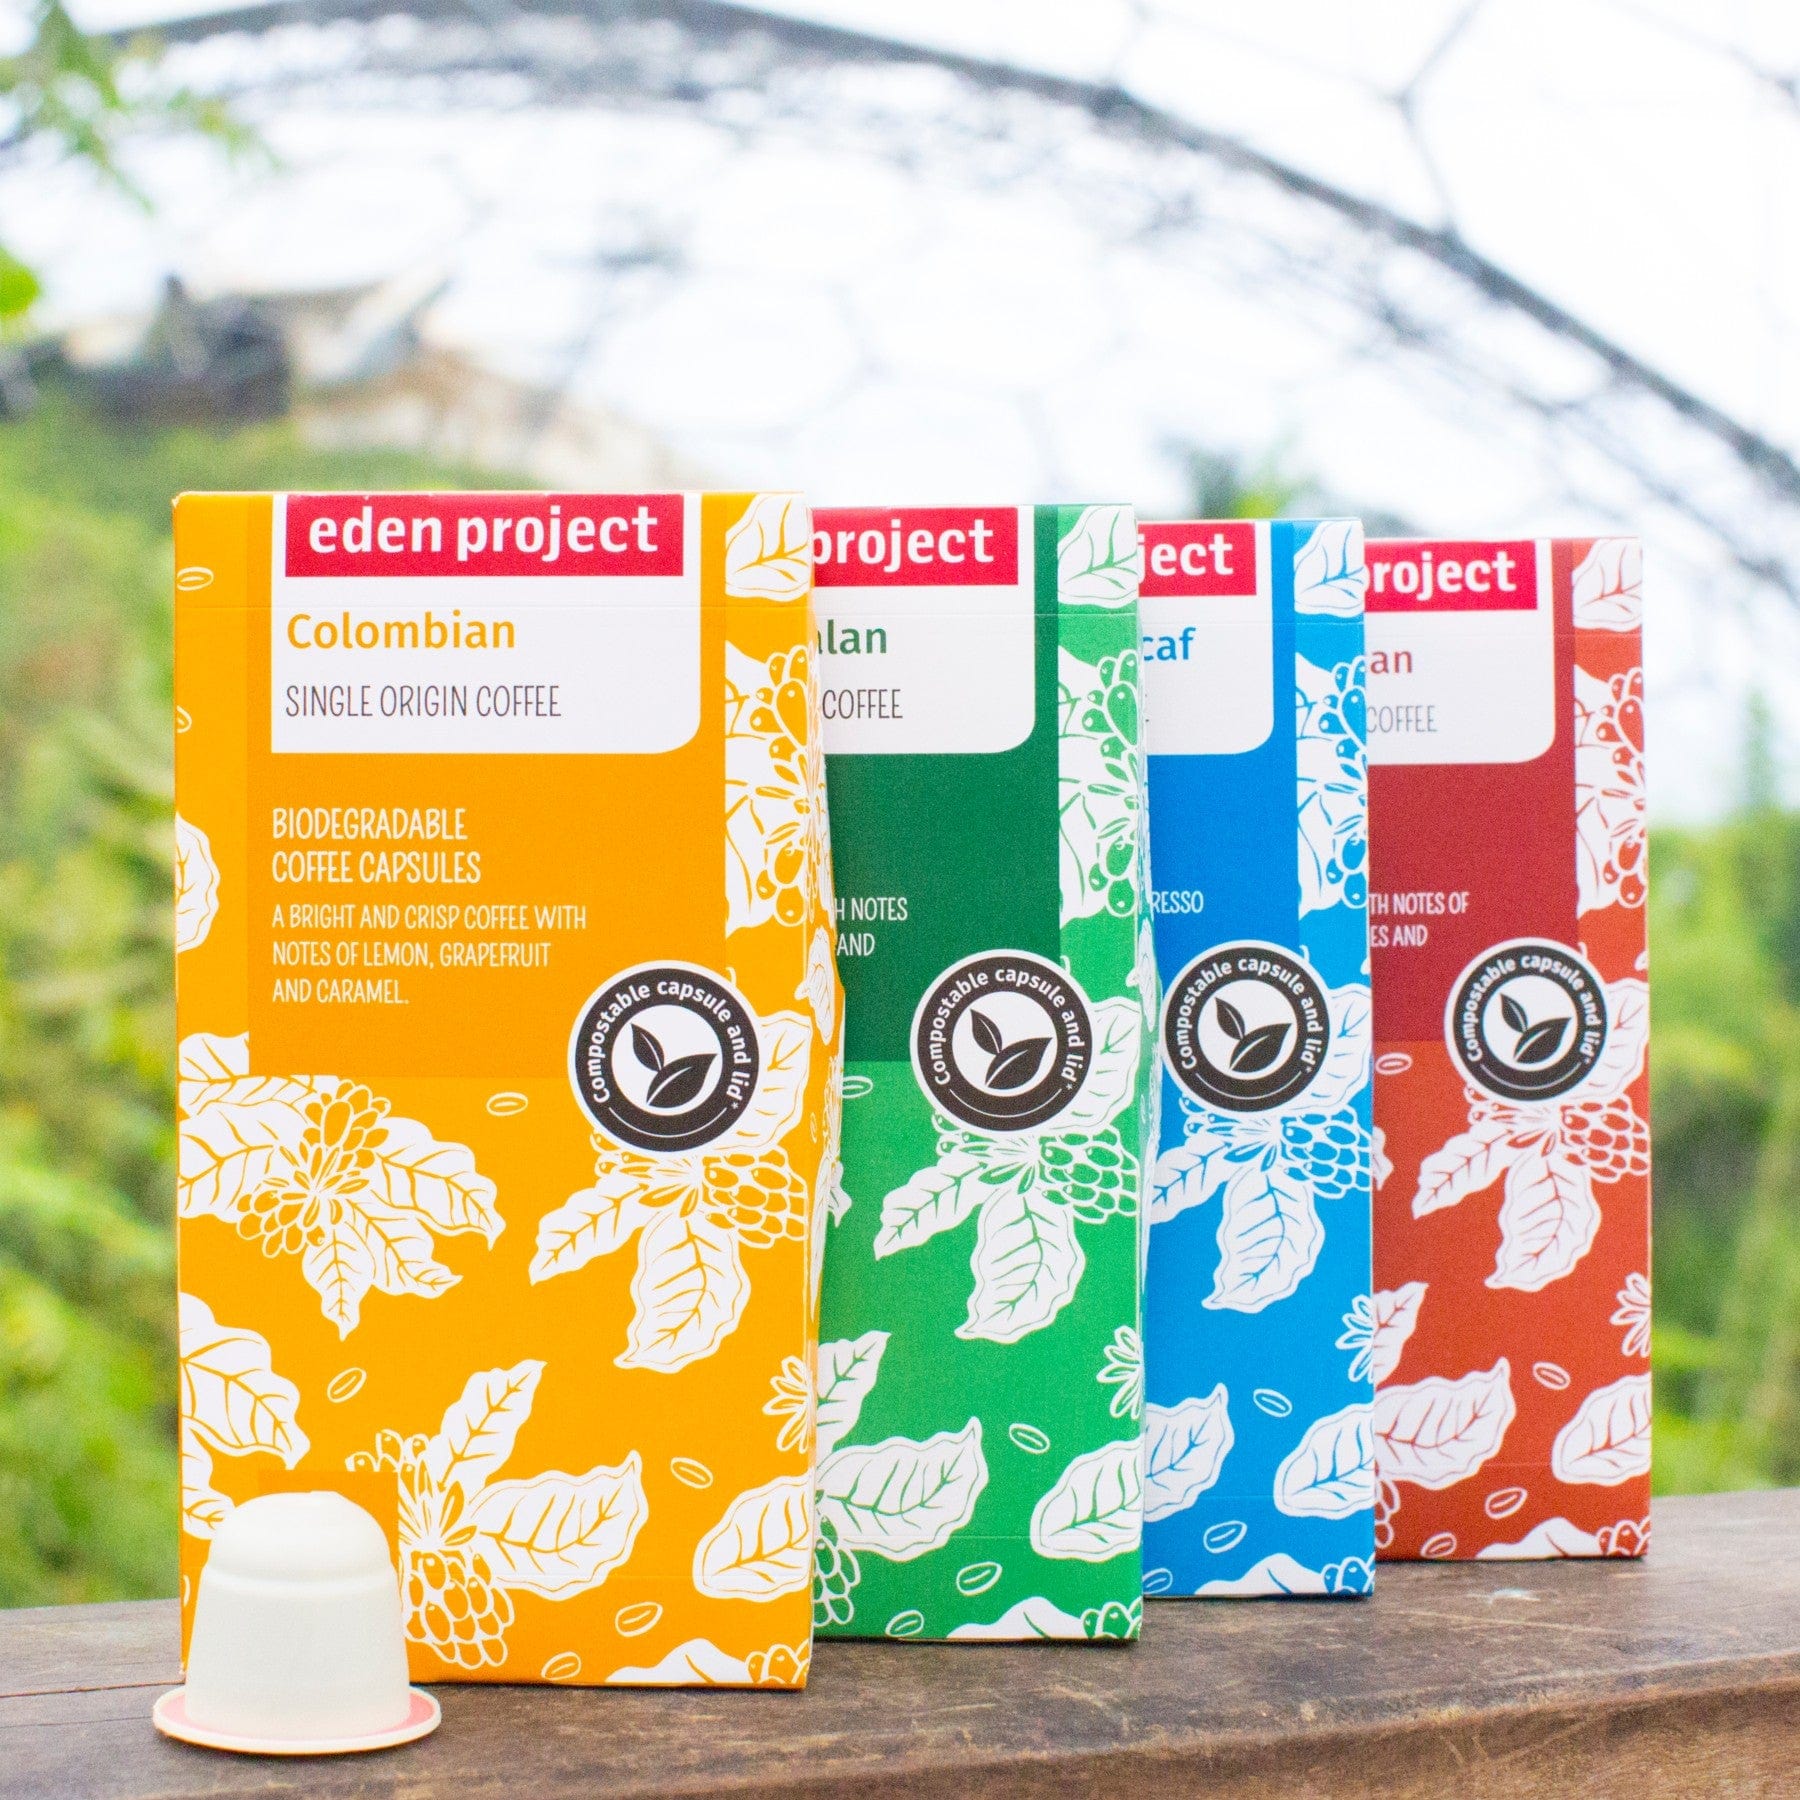 Assorted Eden Project biodegradable coffee capsules in Colombian, Italian, Decaf, and Lungo blends displayed outdoors with a white coffee pod in the foreground.